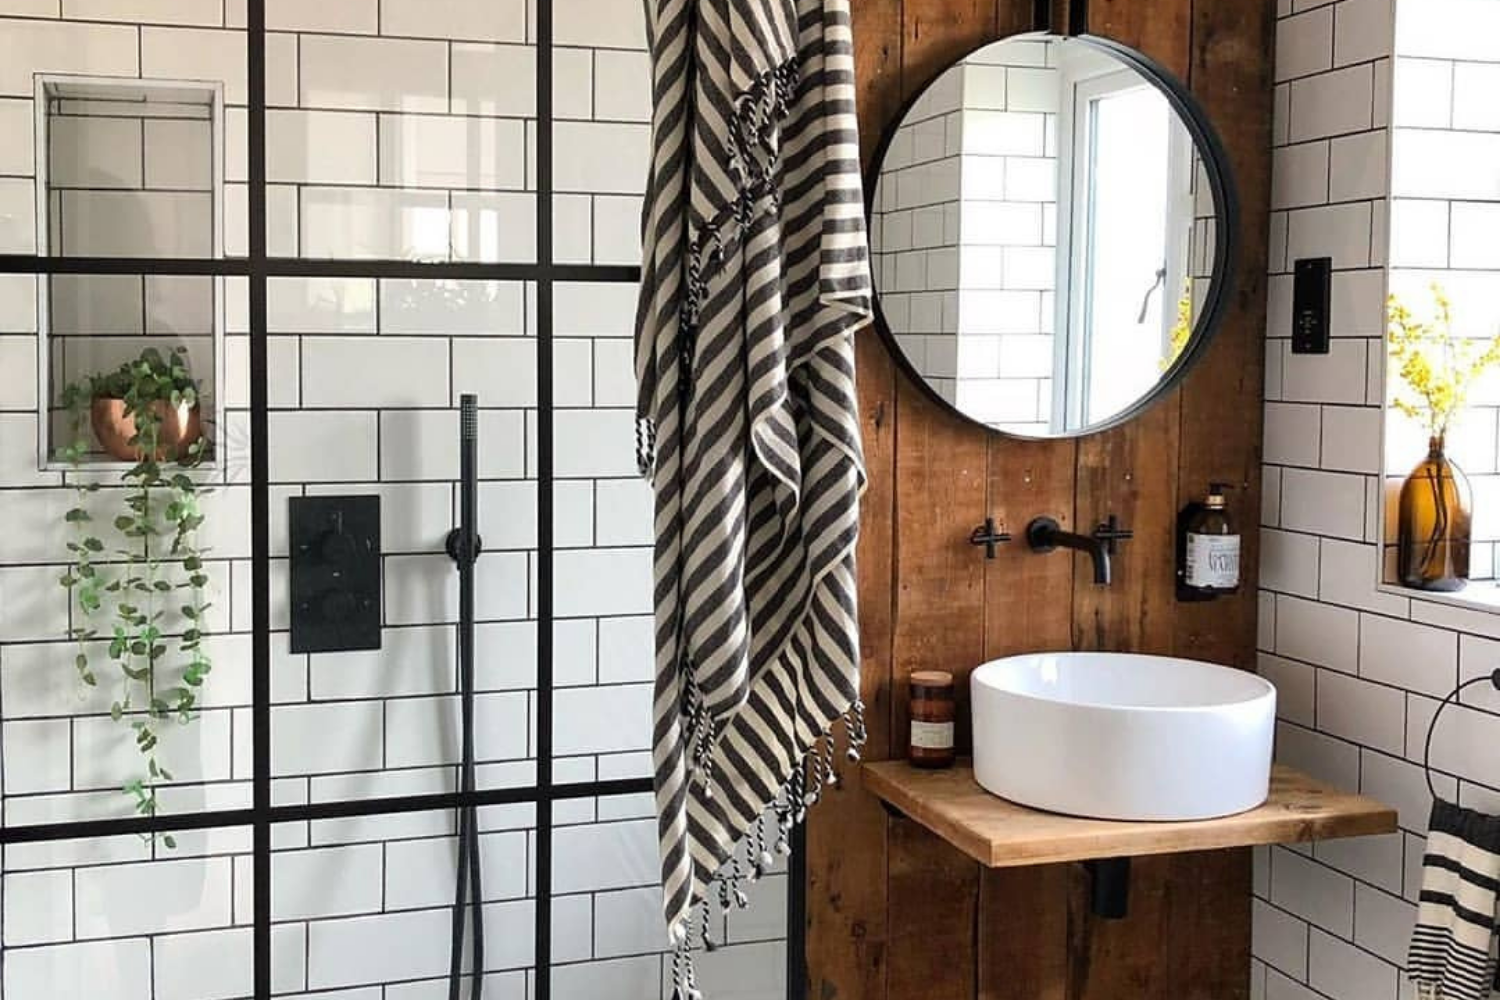 16 Easy Bathroom Upgrades That Don't Require a Gut Job